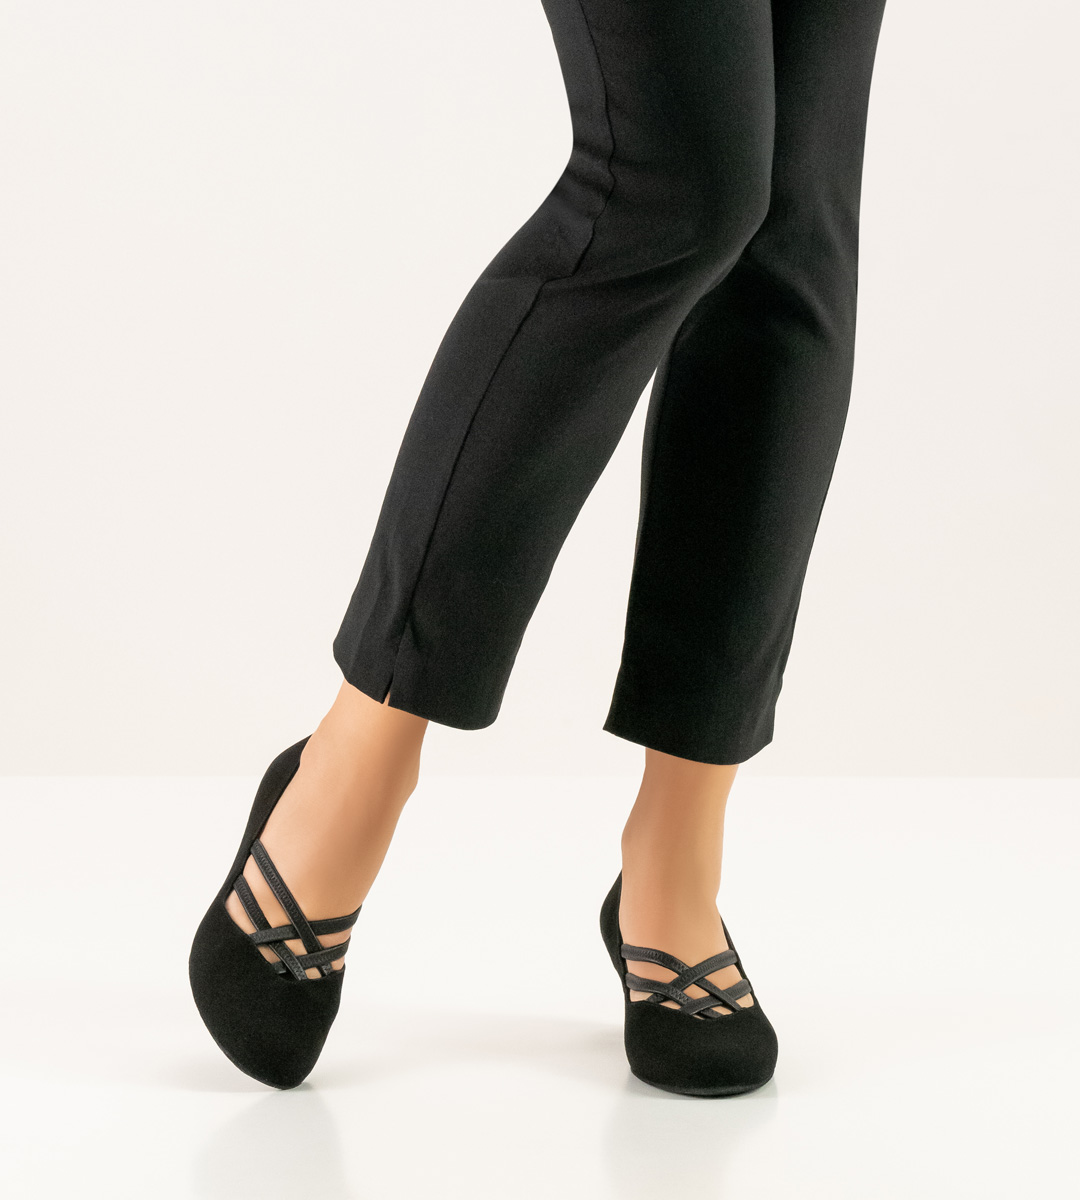 black Werner Kern ladies' dance shoe in combination with black trousers